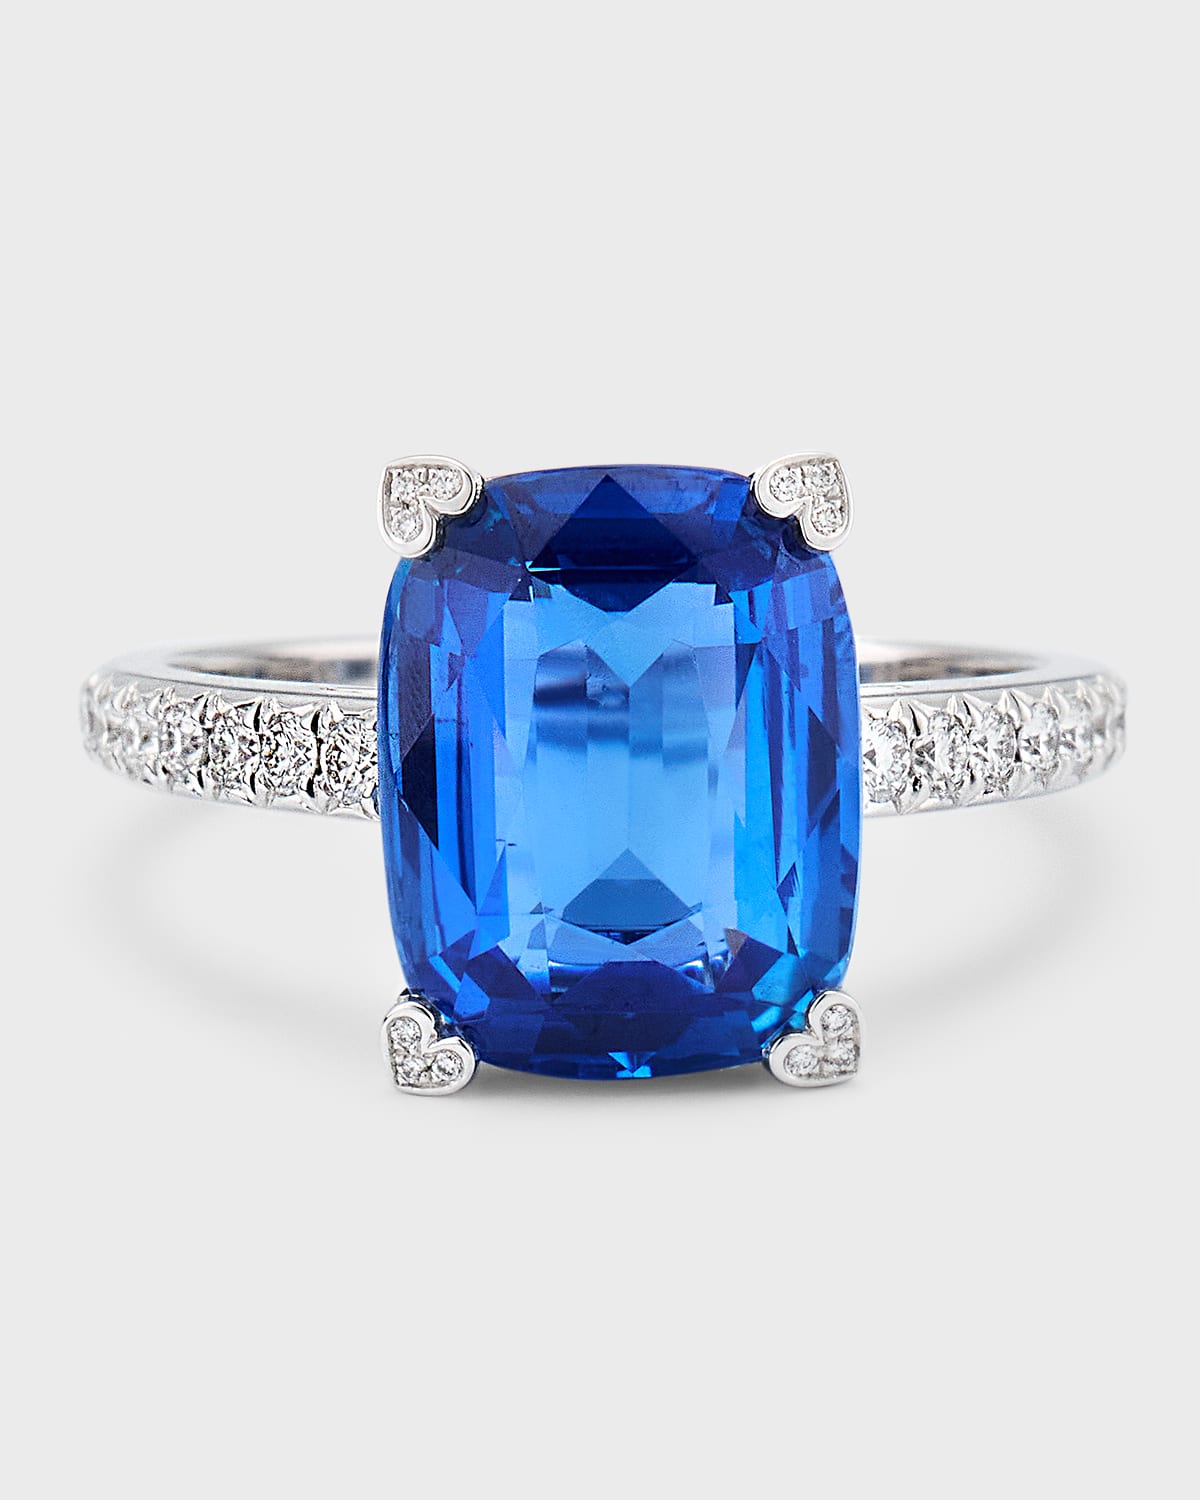 High Jewelry 18K White Gold One-of-a-Kind Blue Sapphire Solitaire Ring